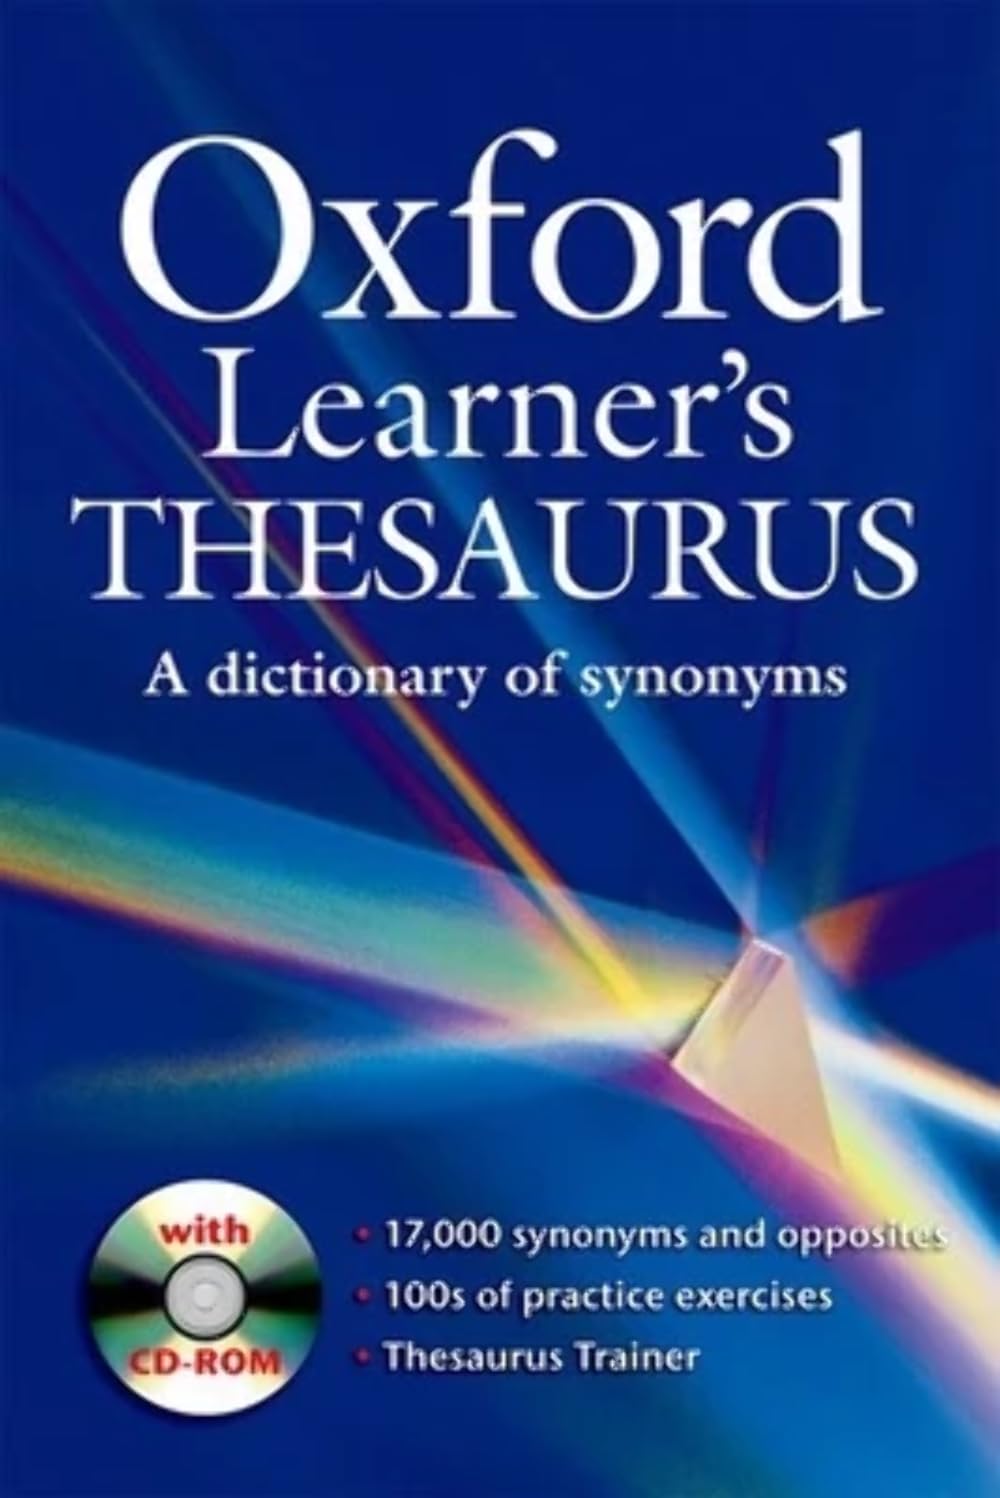 Oxford%20Learner’s%20Thesaurus:%20A%20Dictionary%20of%20Synonyms%20with%20CD%20ROM